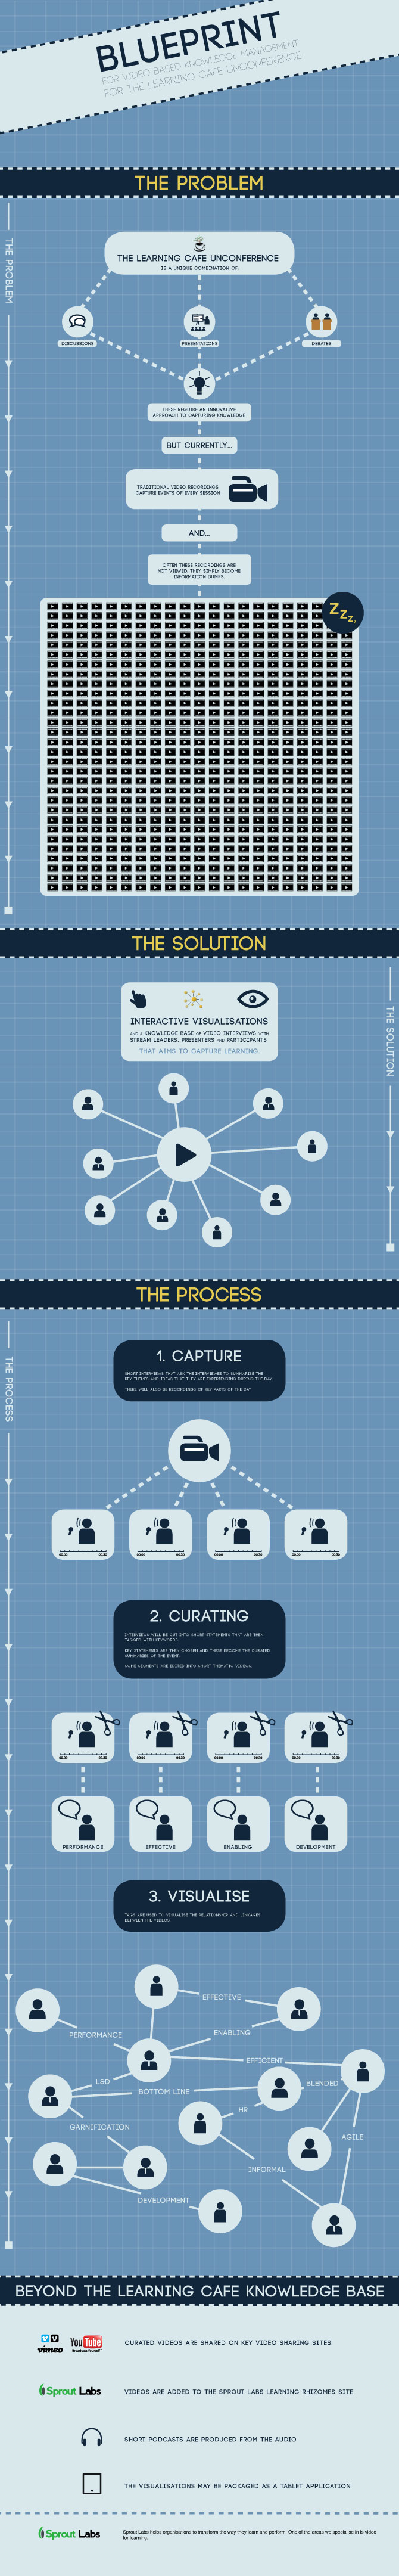 A blueprint for video-based knowledge management for the Learning Cafe Unconference